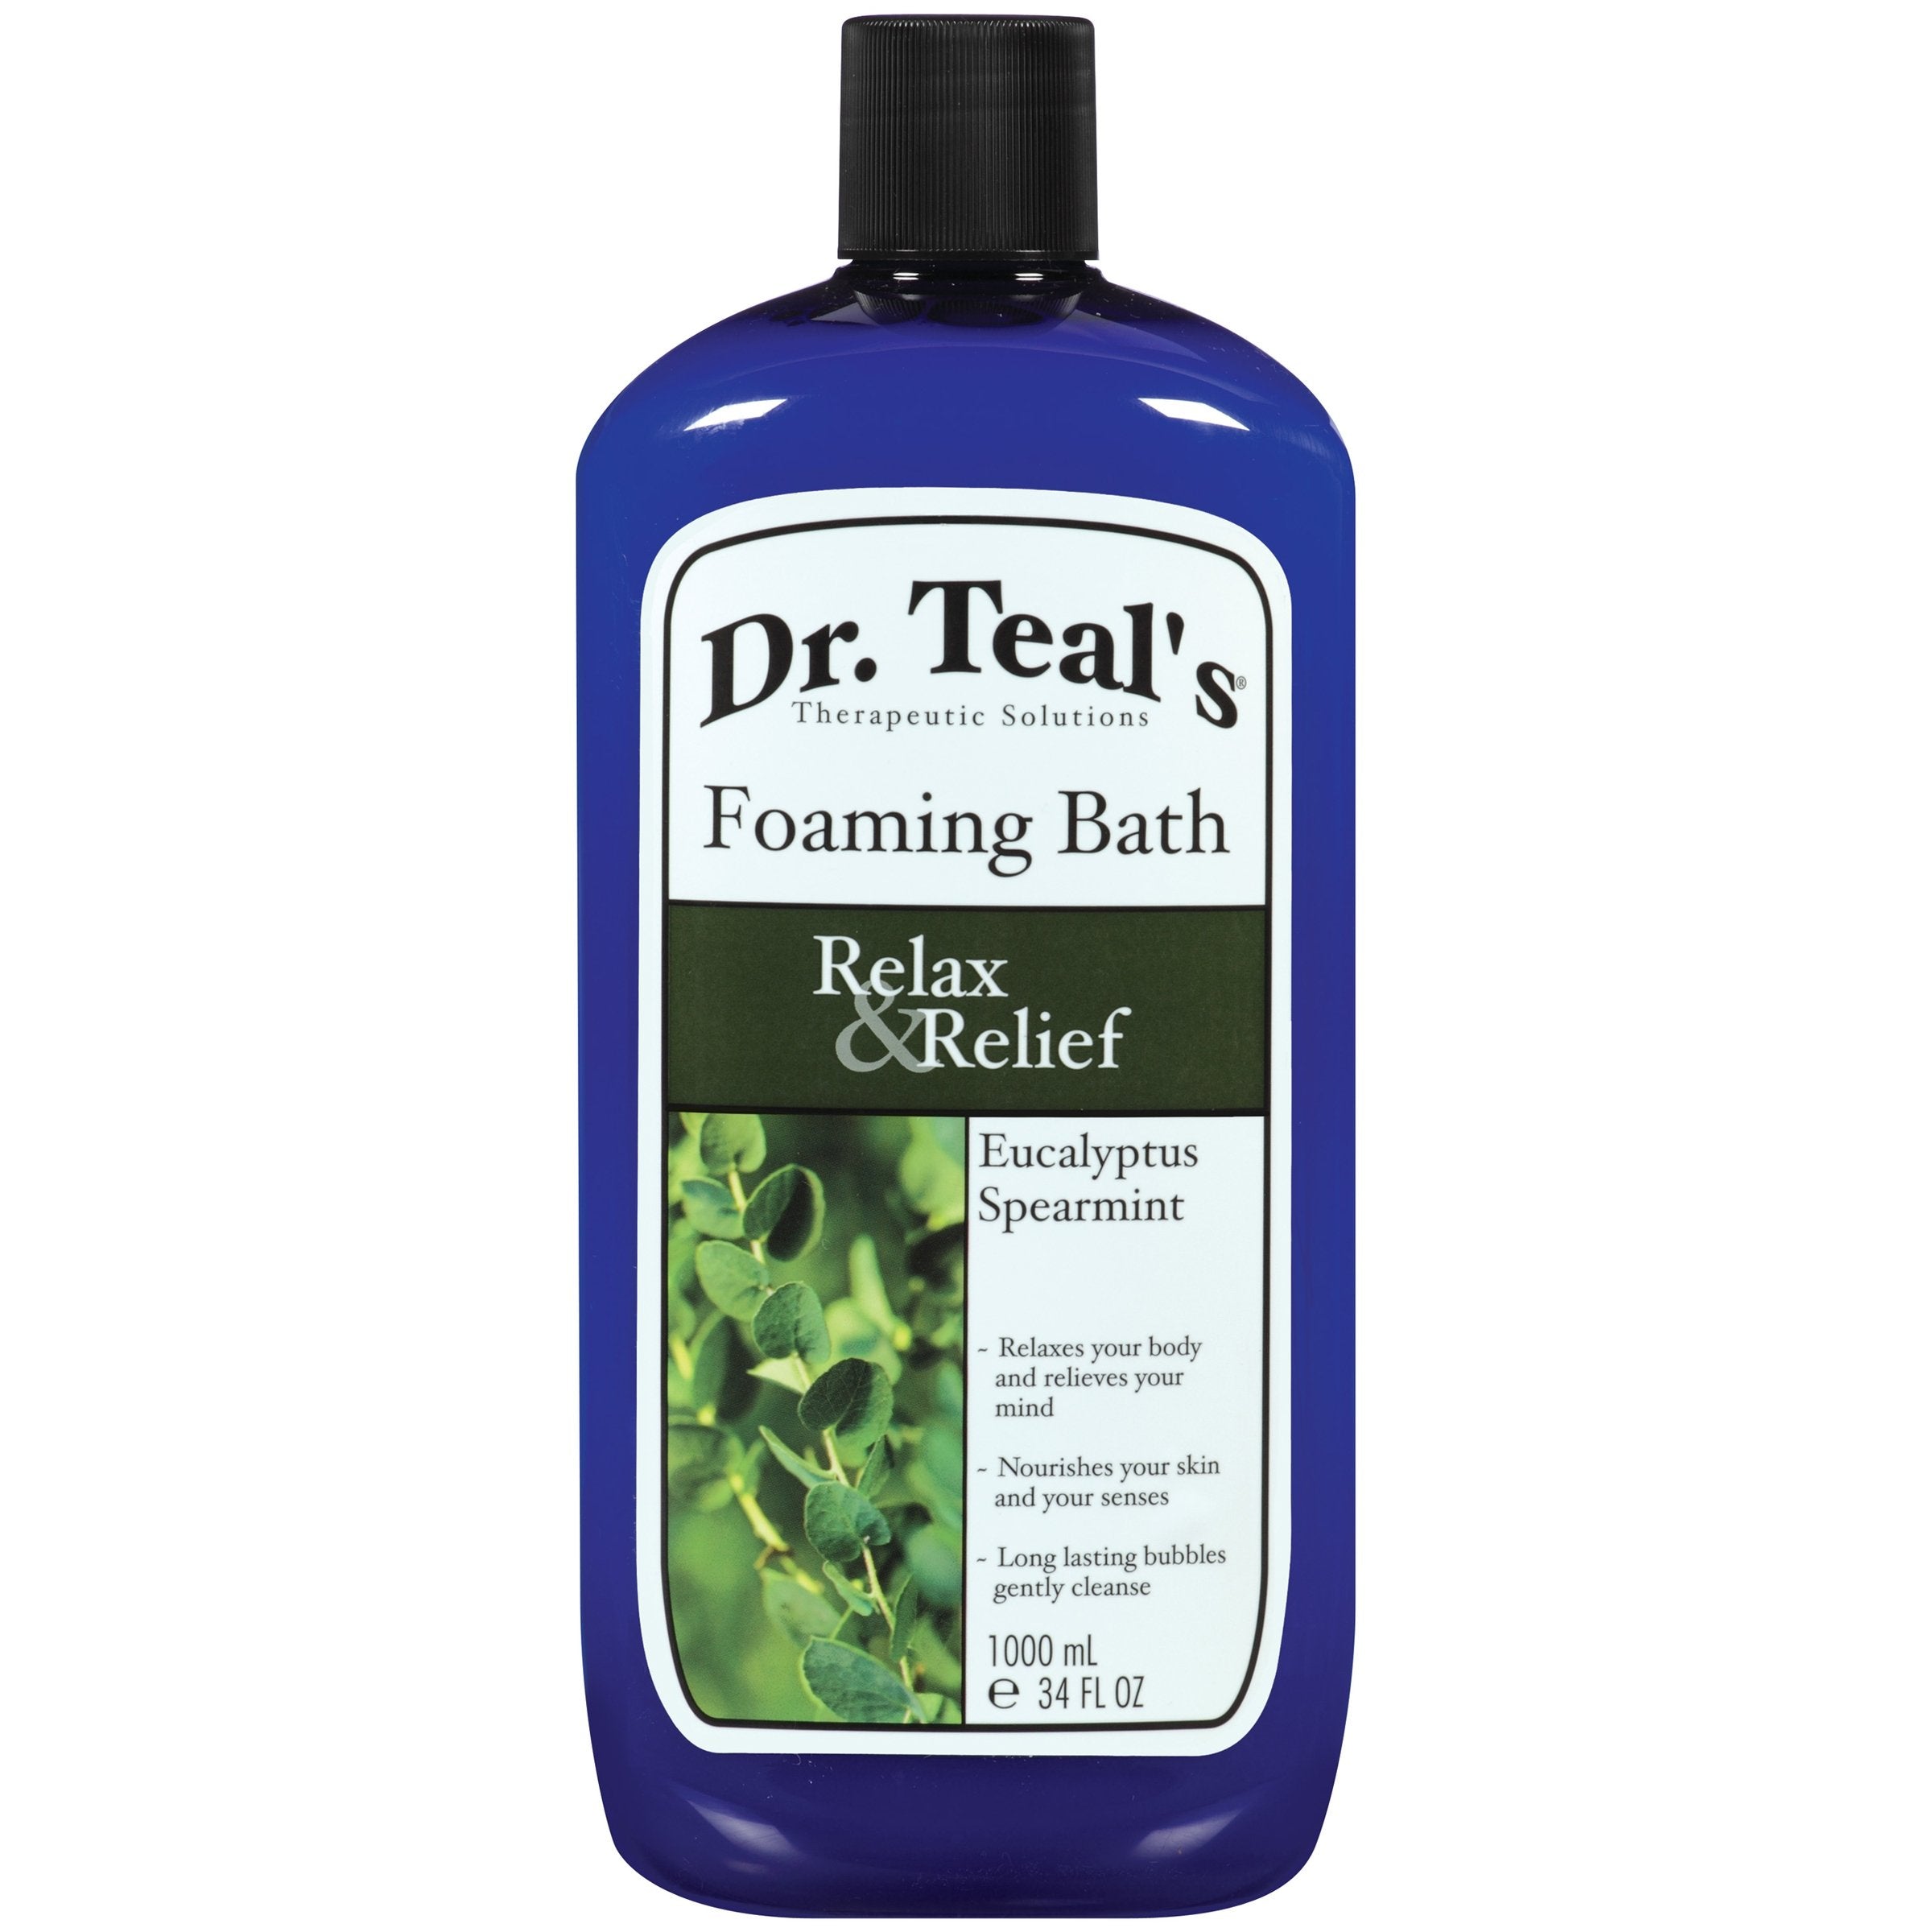 4th Ave Market: Dr Teal's Foaming Bath with Pure Epsom Salt, Relax & Relief with Eucalyptus & Spearm